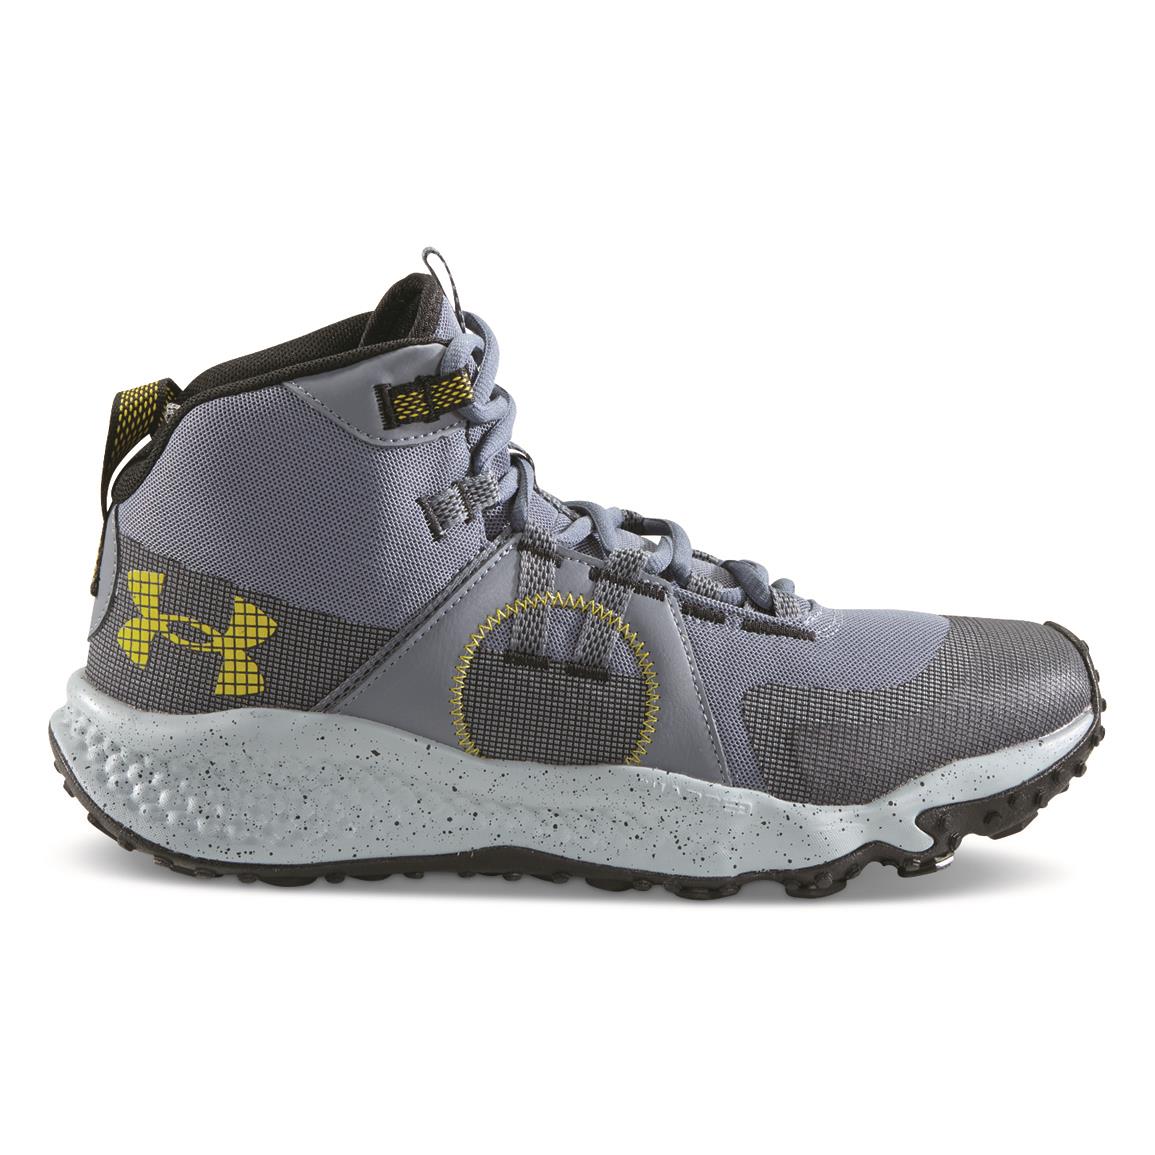 Under Armour Hiking Shoes | Sportsman's Guide